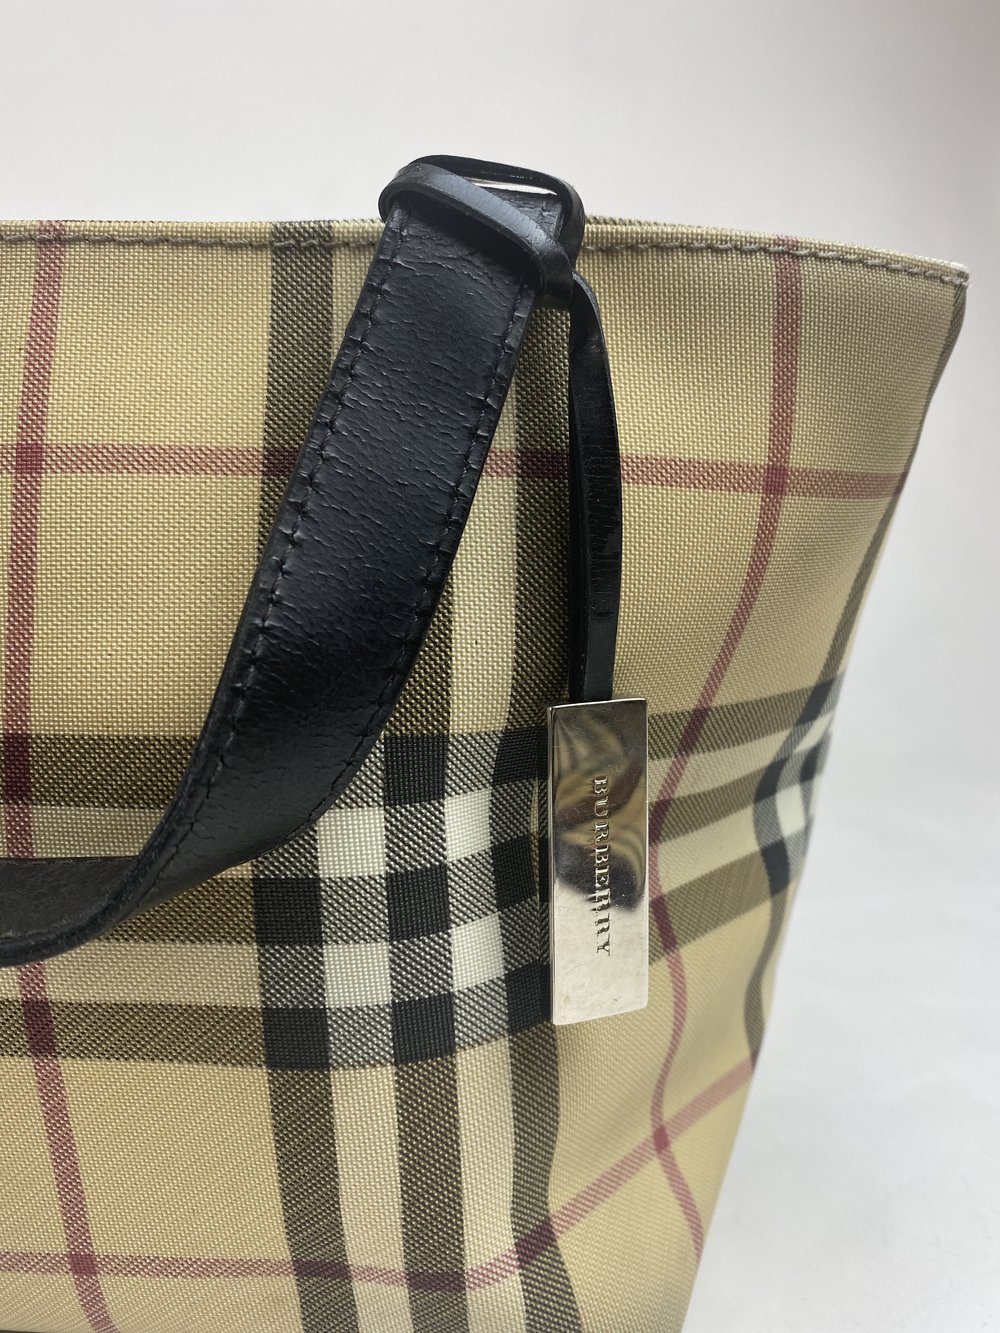 Burberry Lola Exploded Check Quilt Shopper Tote Bag - ShopStyle